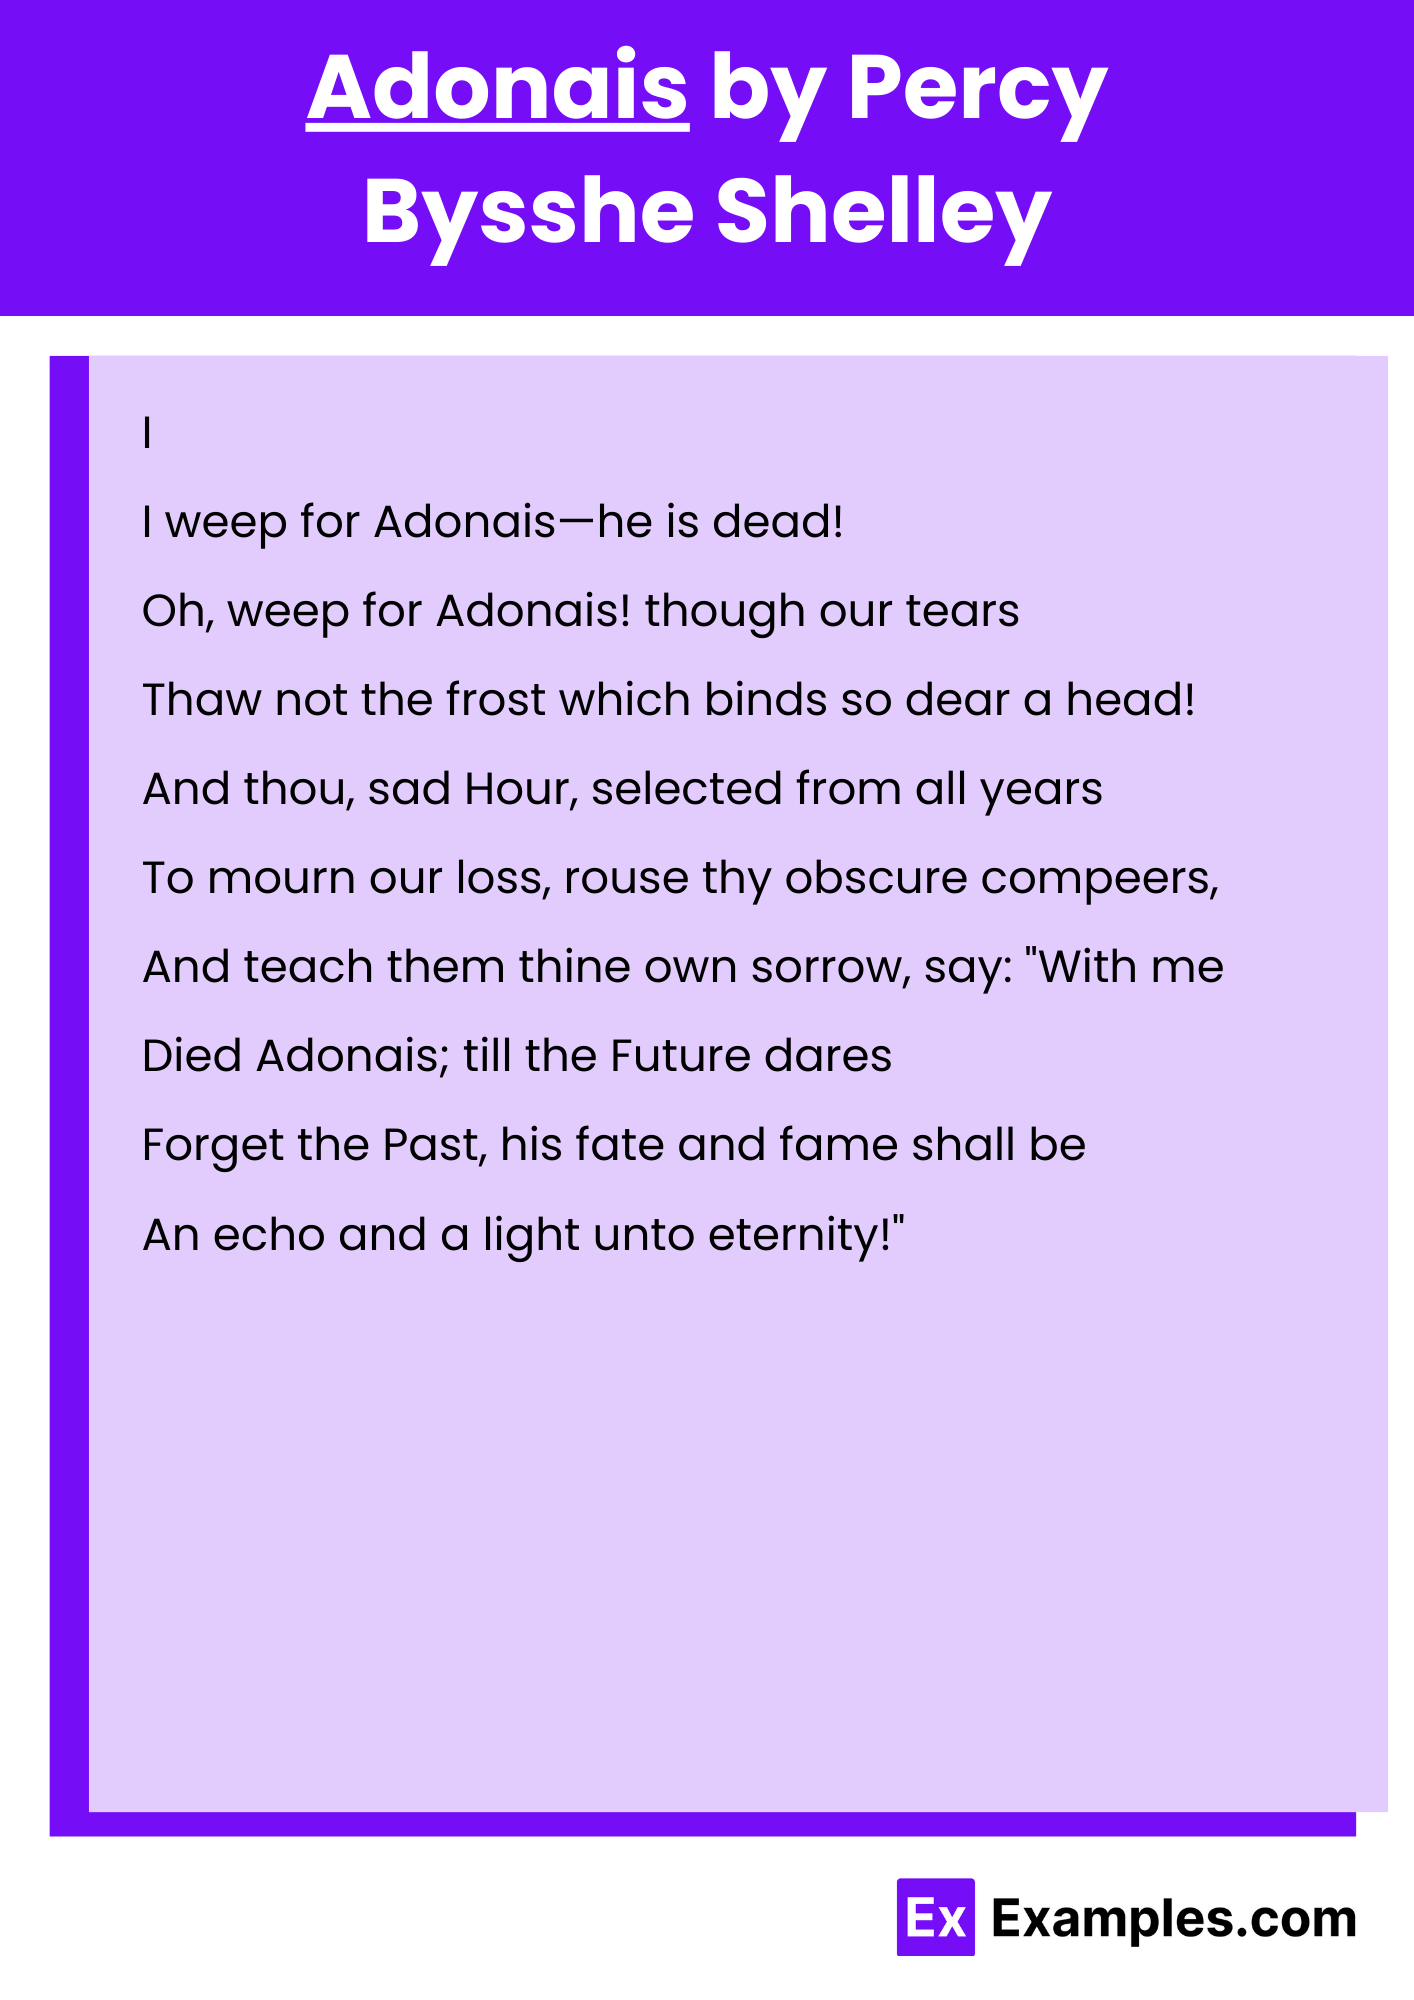 Adonais by Percy Bysshe Shelley